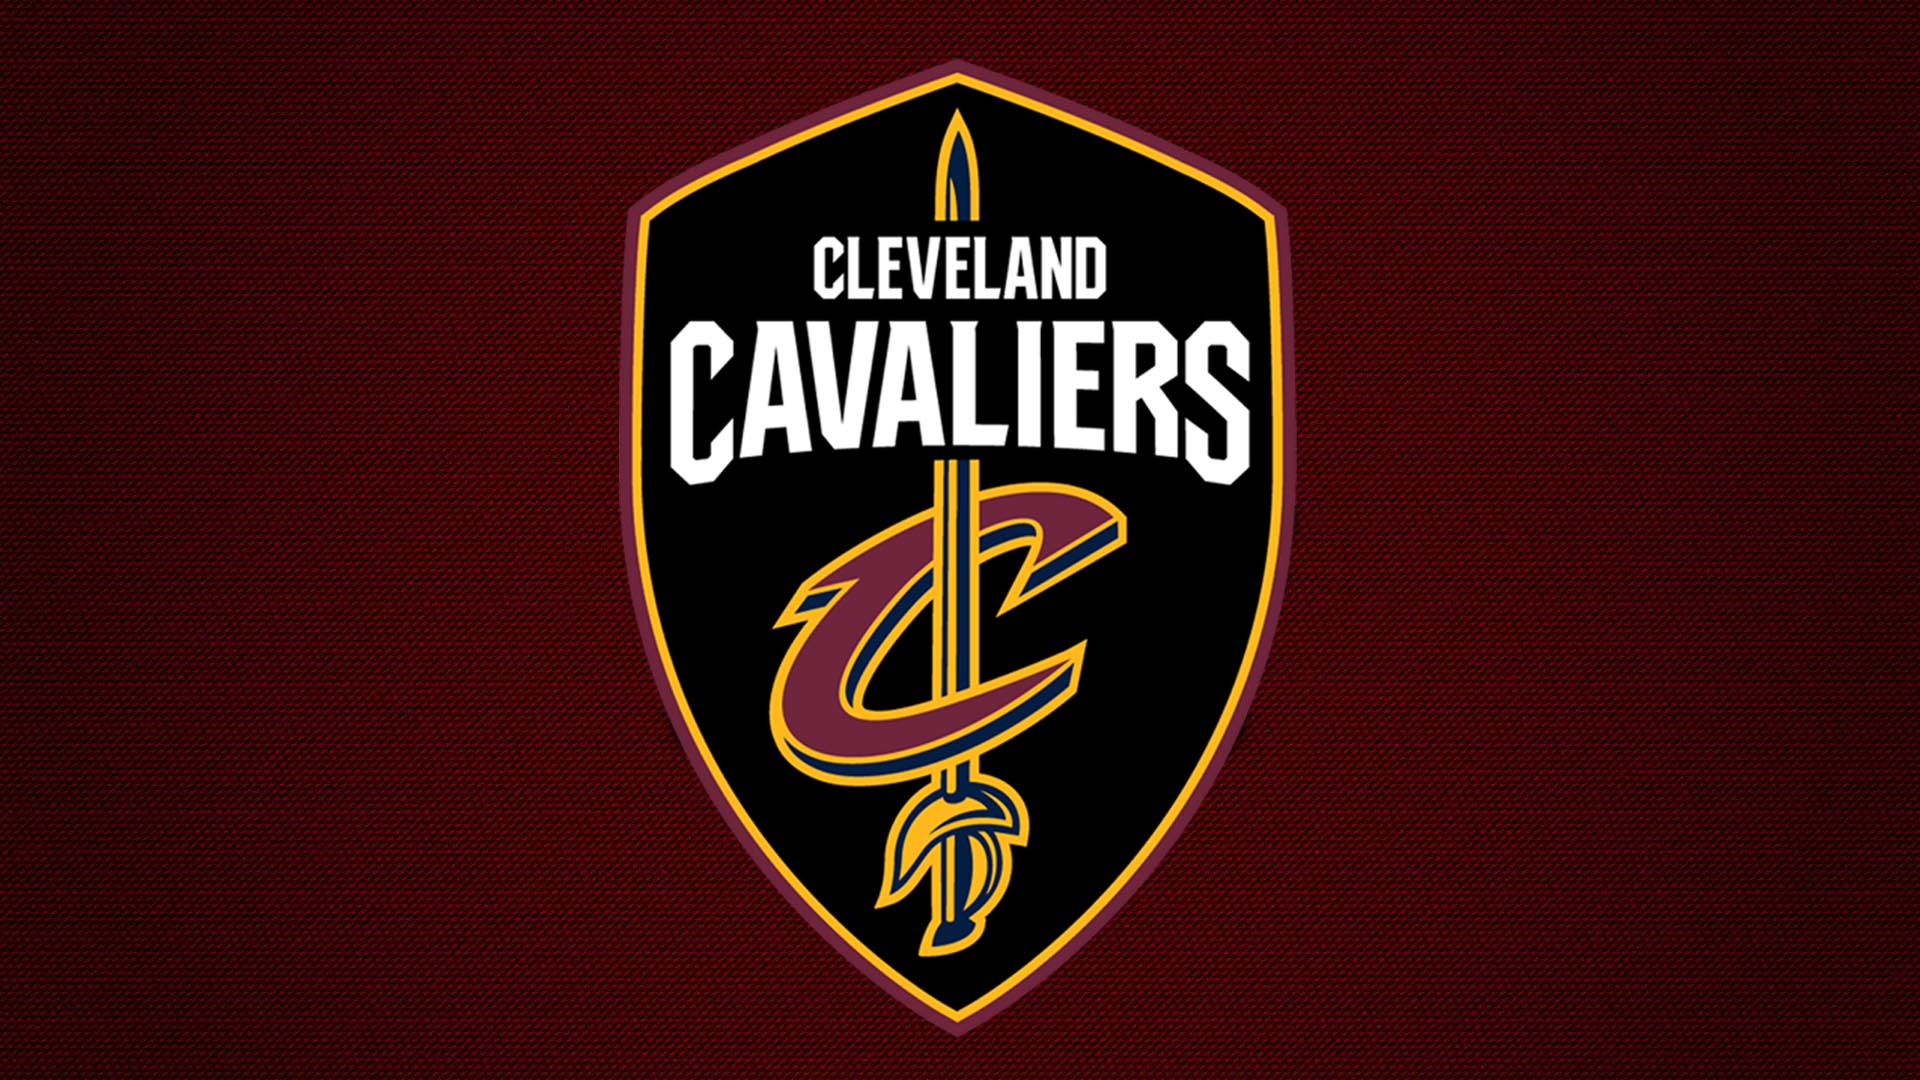 Wallpapers HD Cleveland Cavaliers Logo With Resolution 1920X1080